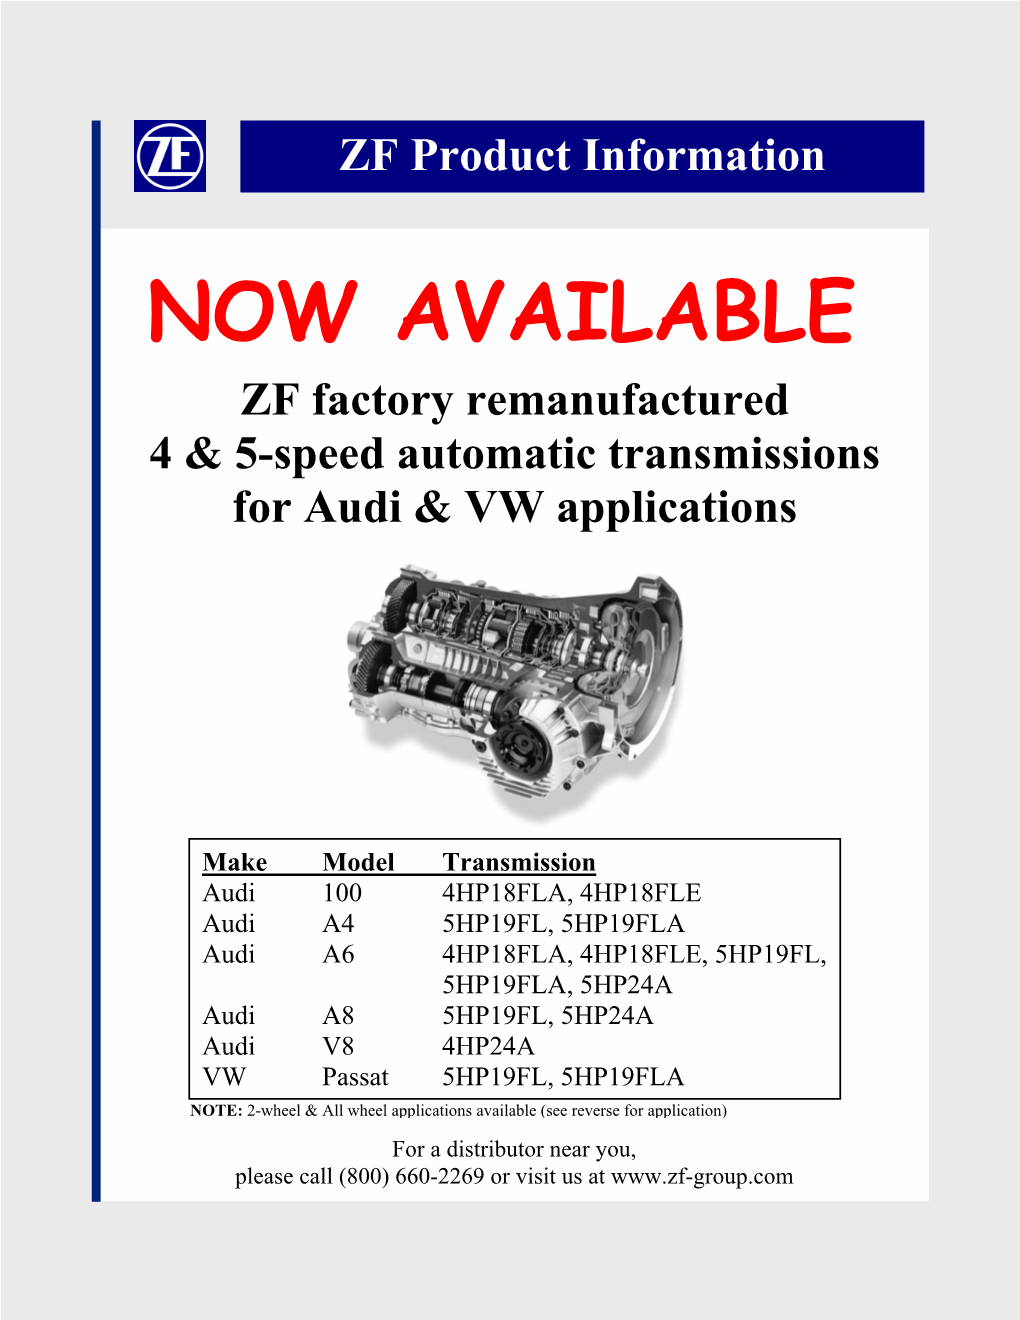 Application Guide for ZF Remanufactured